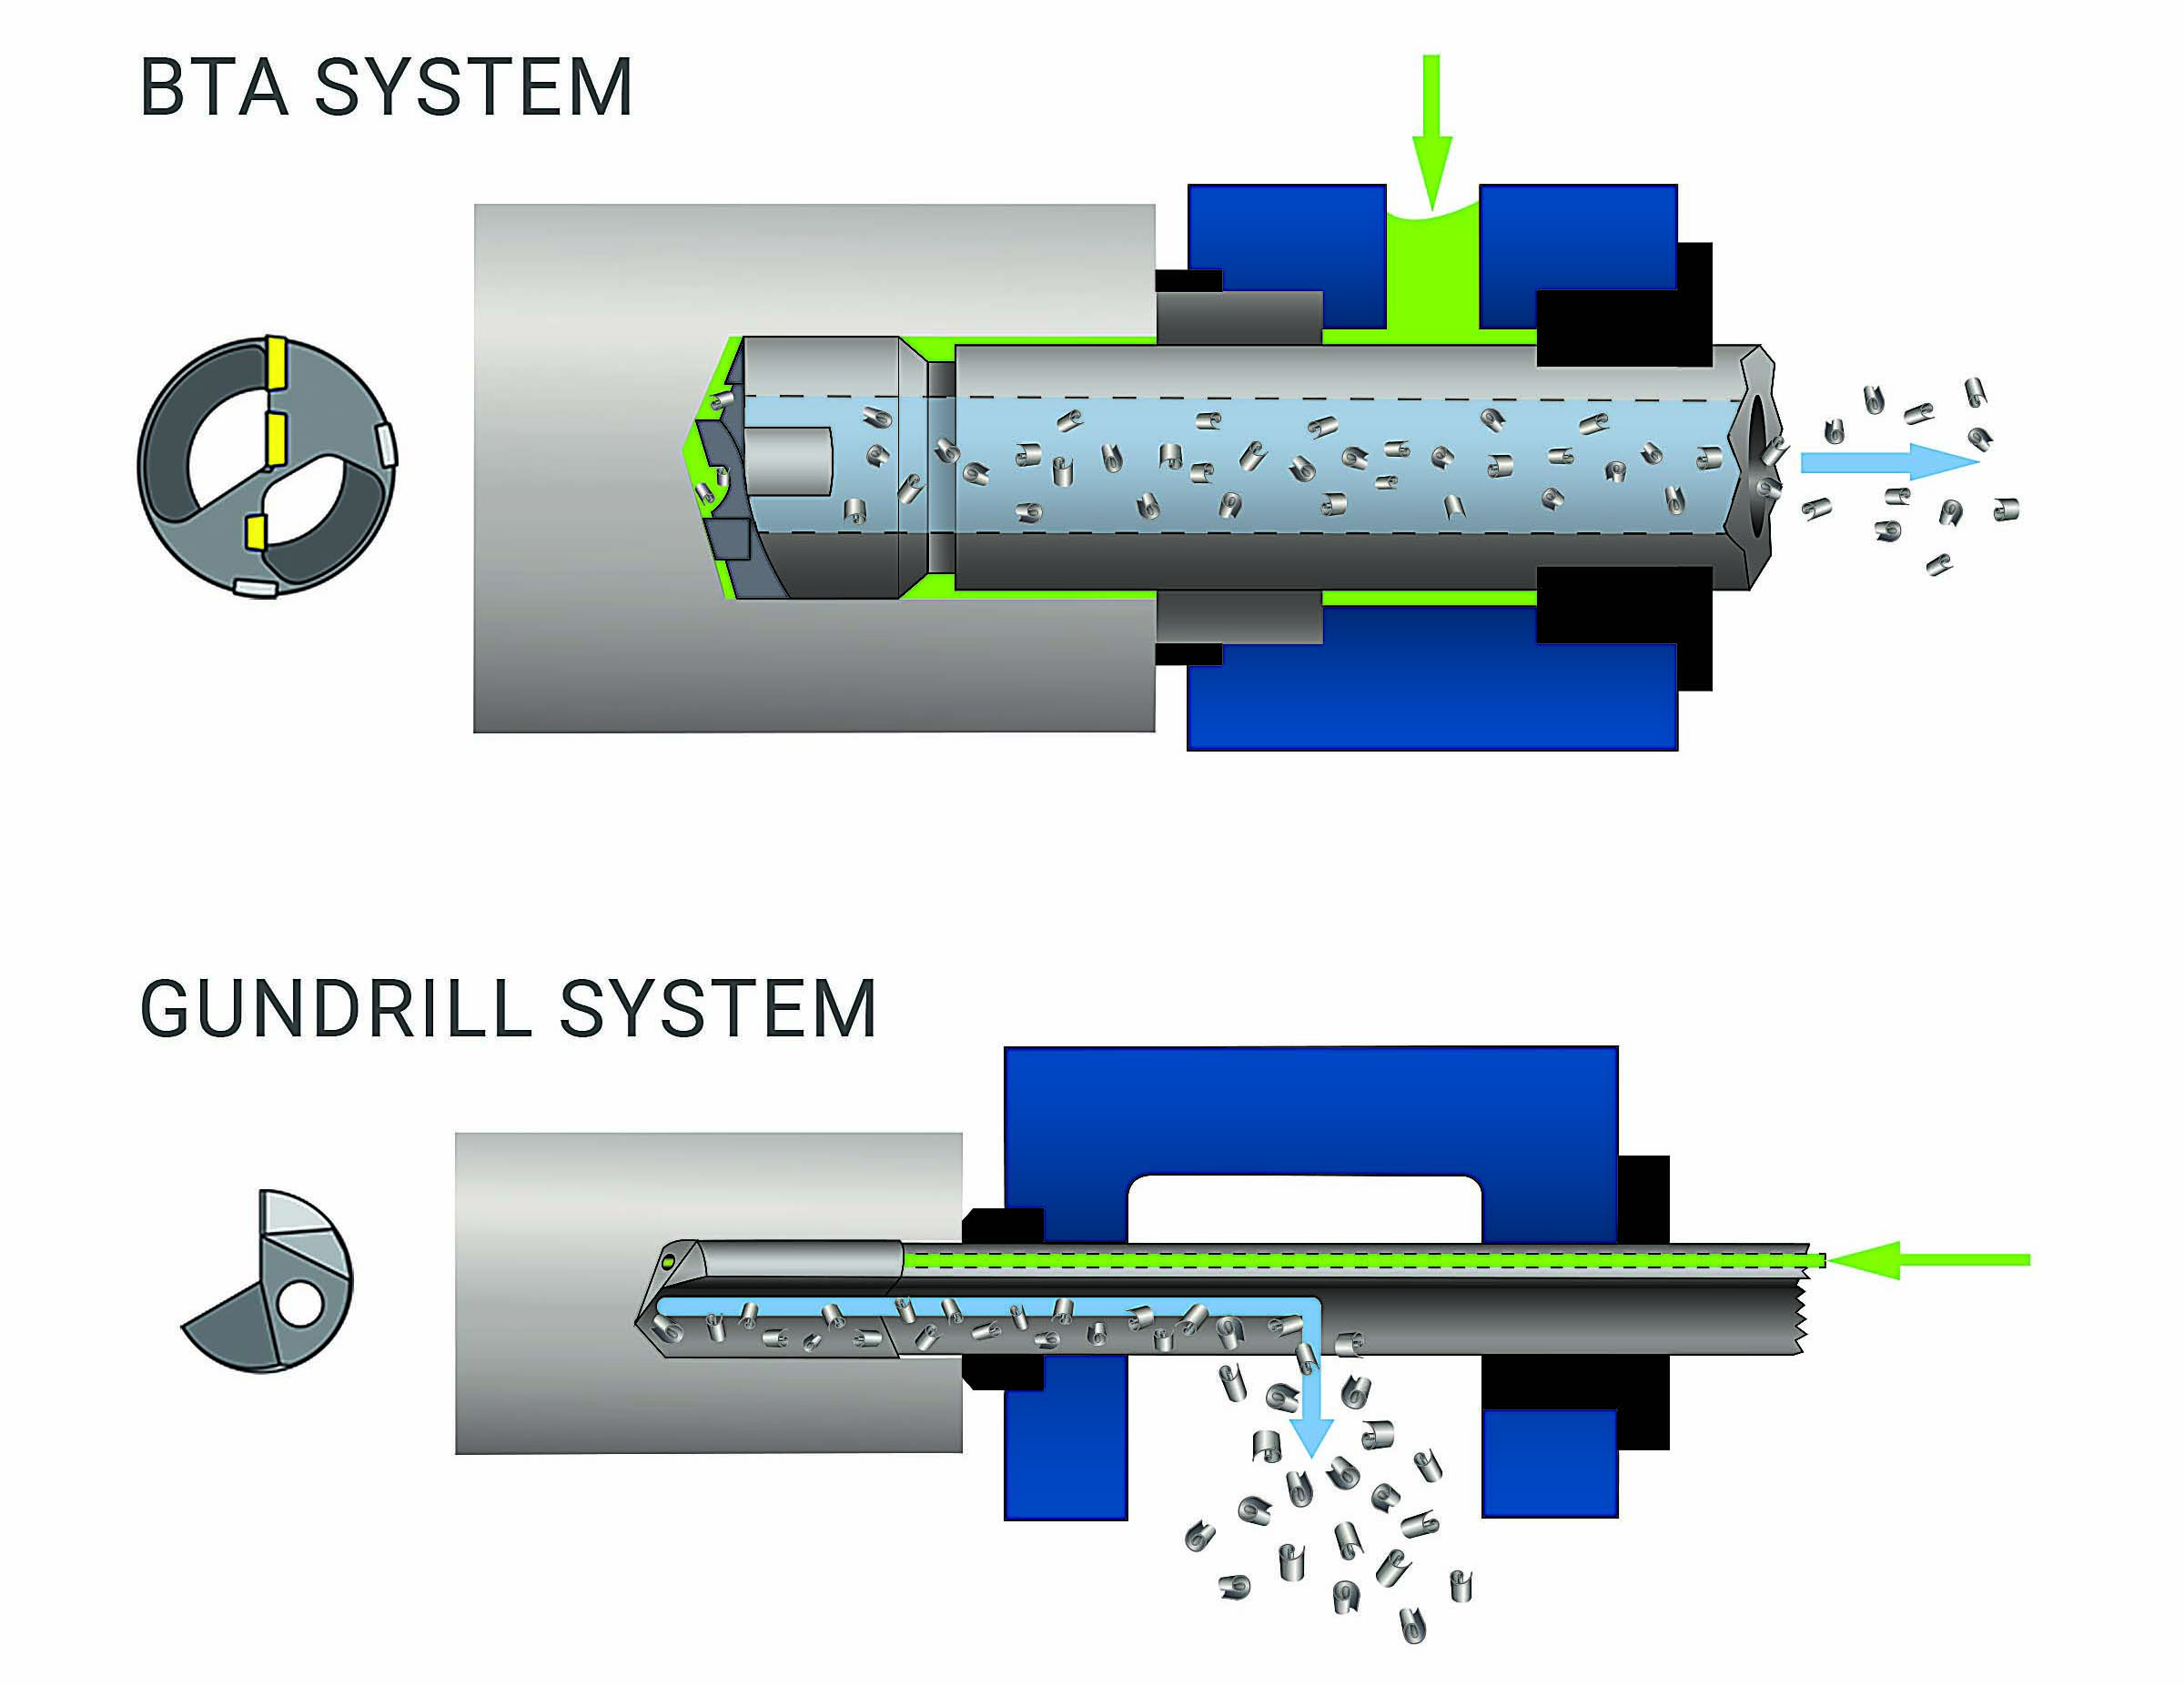 Compared with gundrilling, in which through-tool coolant is introduced at the cutting zone and forces chips out through the drilled bore, the BTA system essentially operates in reverse.